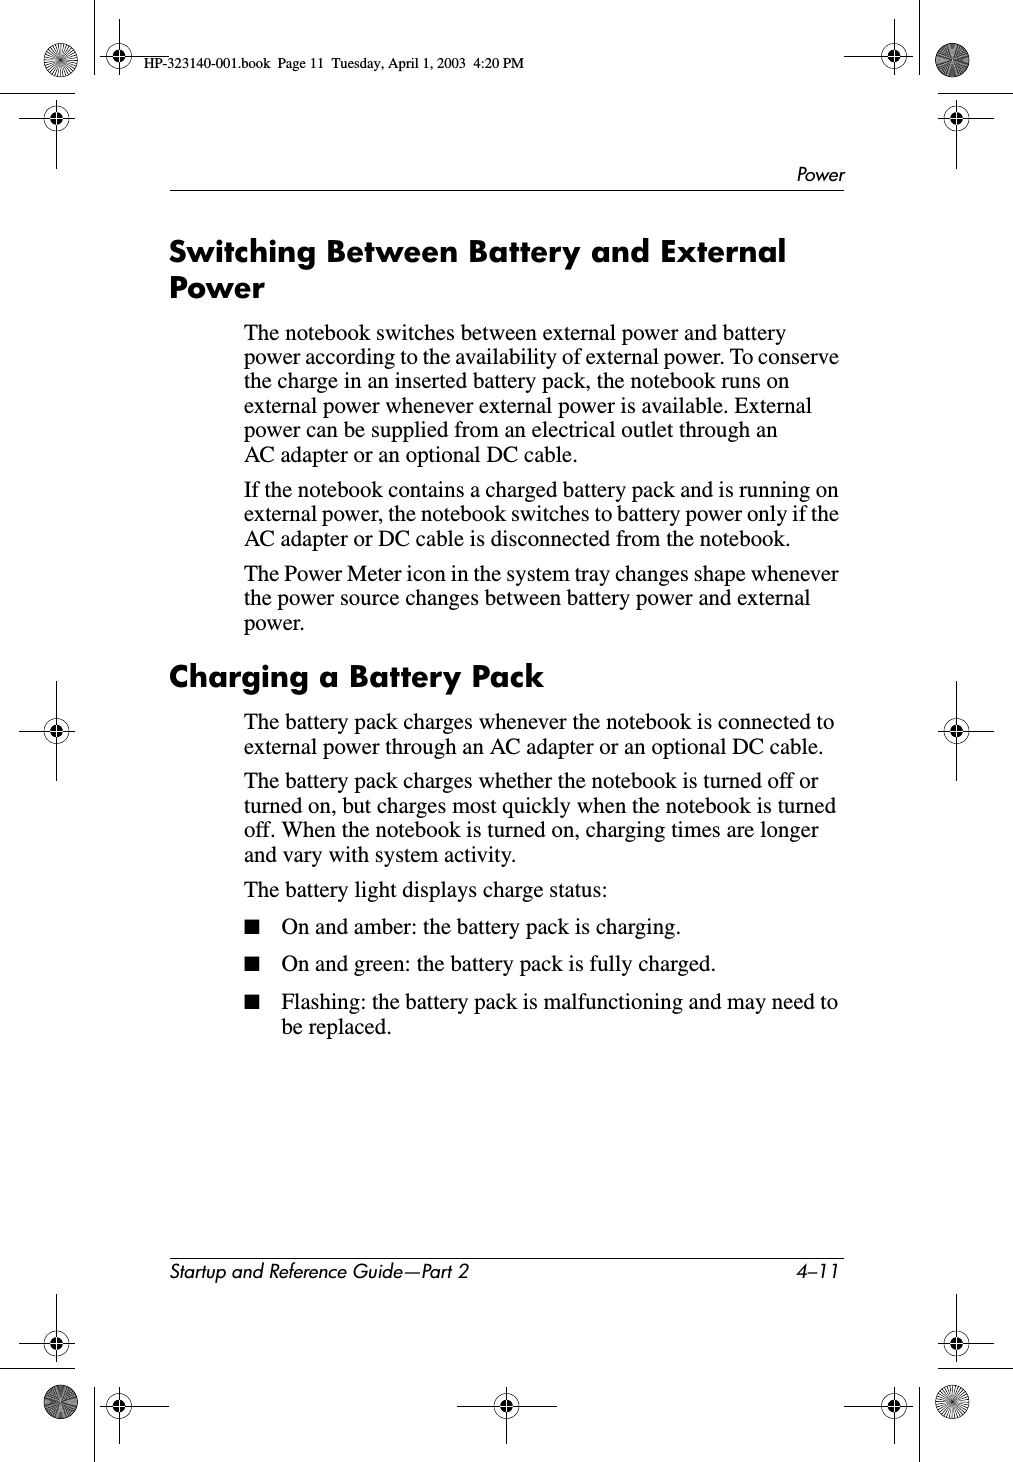 PowerStartup and Reference Guide—Part 2 4–11Switching Between Battery and External PowerThe notebook switches between external power and battery power according to the availability of external power. To conserve the charge in an inserted battery pack, the notebook runs on external power whenever external power is available. External power can be supplied from an electrical outlet through an AC adapter or an optional DC cable.If the notebook contains a charged battery pack and is running on external power, the notebook switches to battery power only if the AC adapter or DC cable is disconnected from the notebook.The Power Meter icon in the system tray changes shape whenever the power source changes between battery power and external power.Charging a Battery PackThe battery pack charges whenever the notebook is connected to external power through an AC adapter or an optional DC cable.The battery pack charges whether the notebook is turned off or turned on, but charges most quickly when the notebook is turned off. When the notebook is turned on, charging times are longer and vary with system activity.The battery light displays charge status:■On and amber: the battery pack is charging.■On and green: the battery pack is fully charged.■Flashing: the battery pack is malfunctioning and may need to be replaced.HP-323140-001.book  Page 11  Tuesday, April 1, 2003  4:20 PM